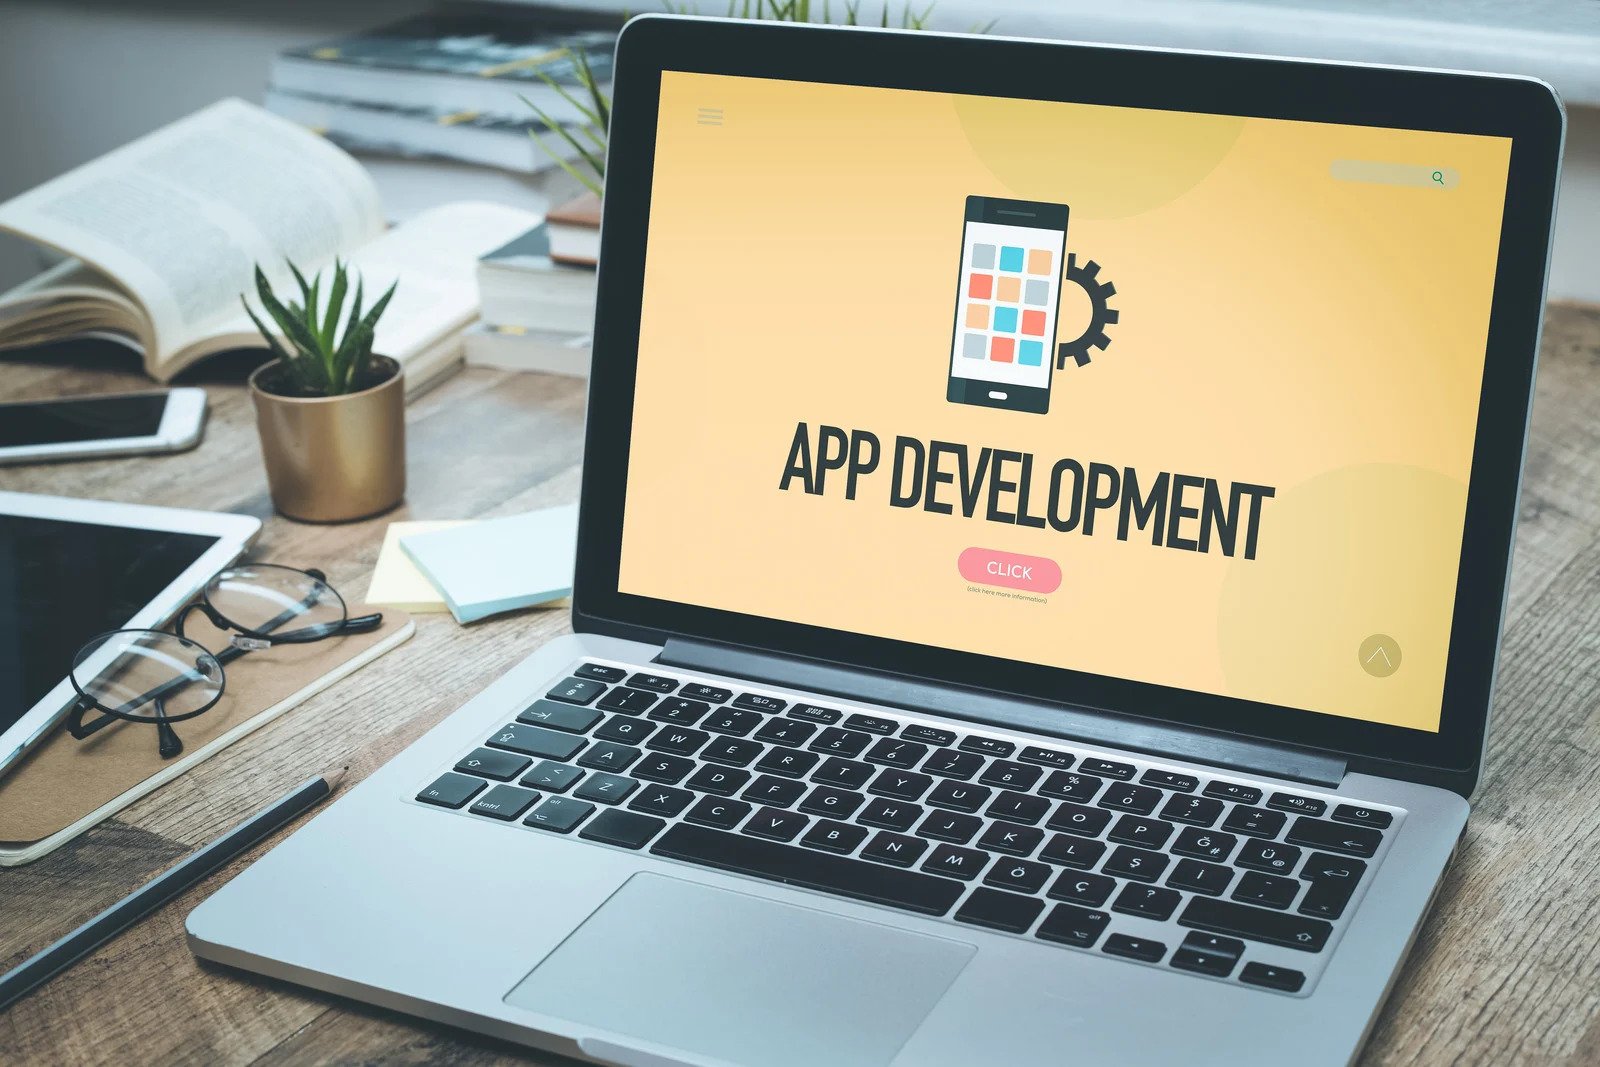 An image of a laptop displaying "app development" on-screen.